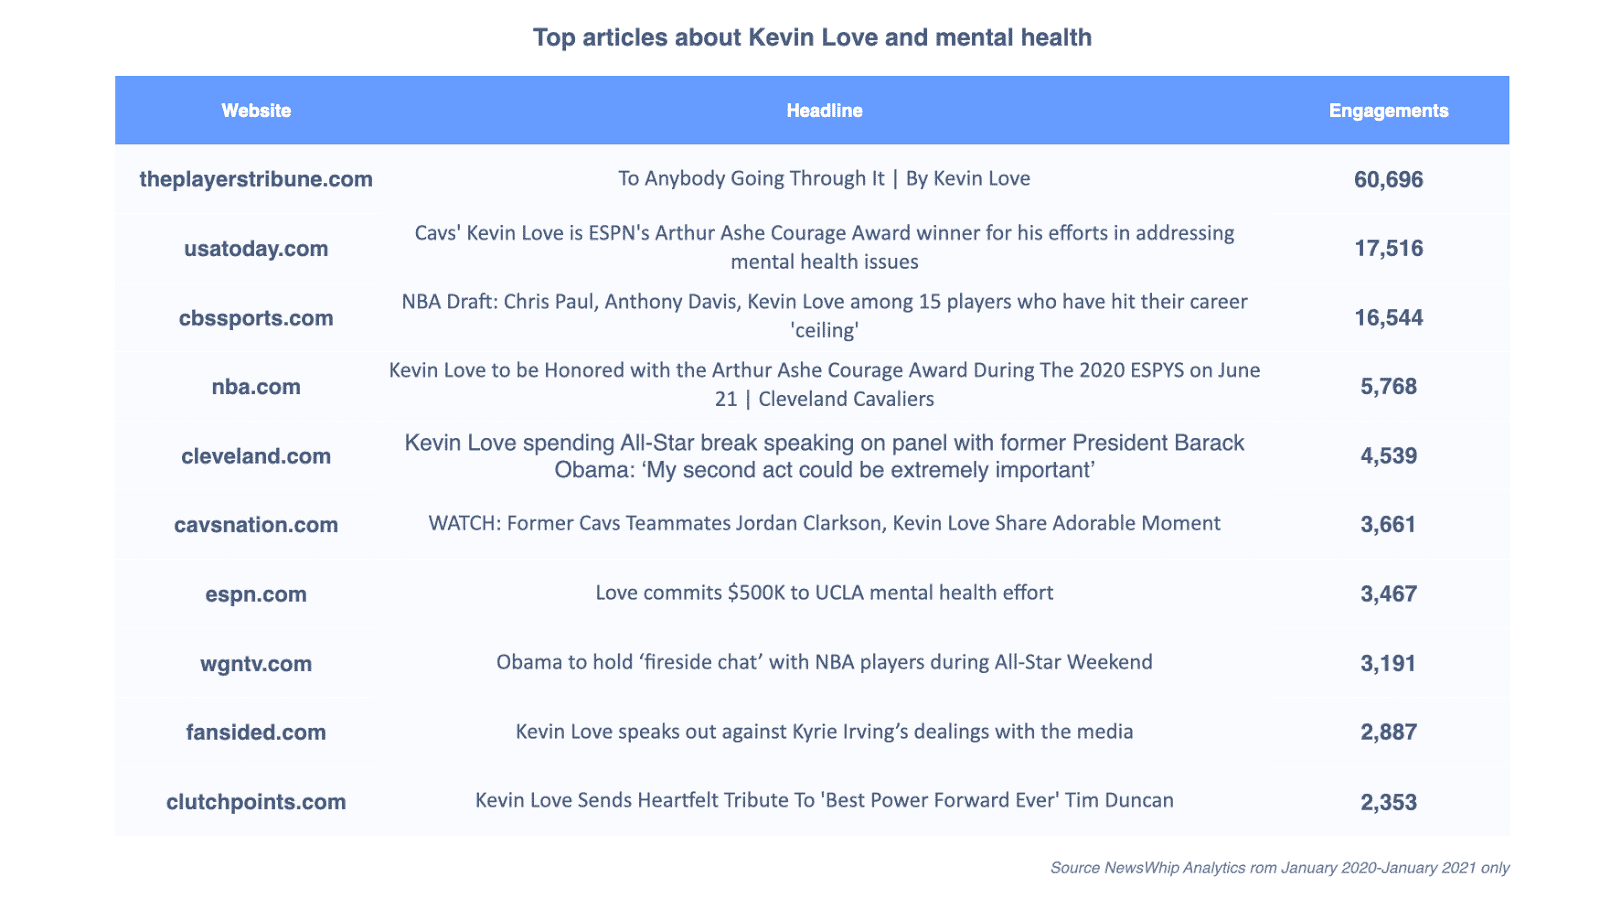 Chart showing the top stories about Kevin Love and mental health in the past year